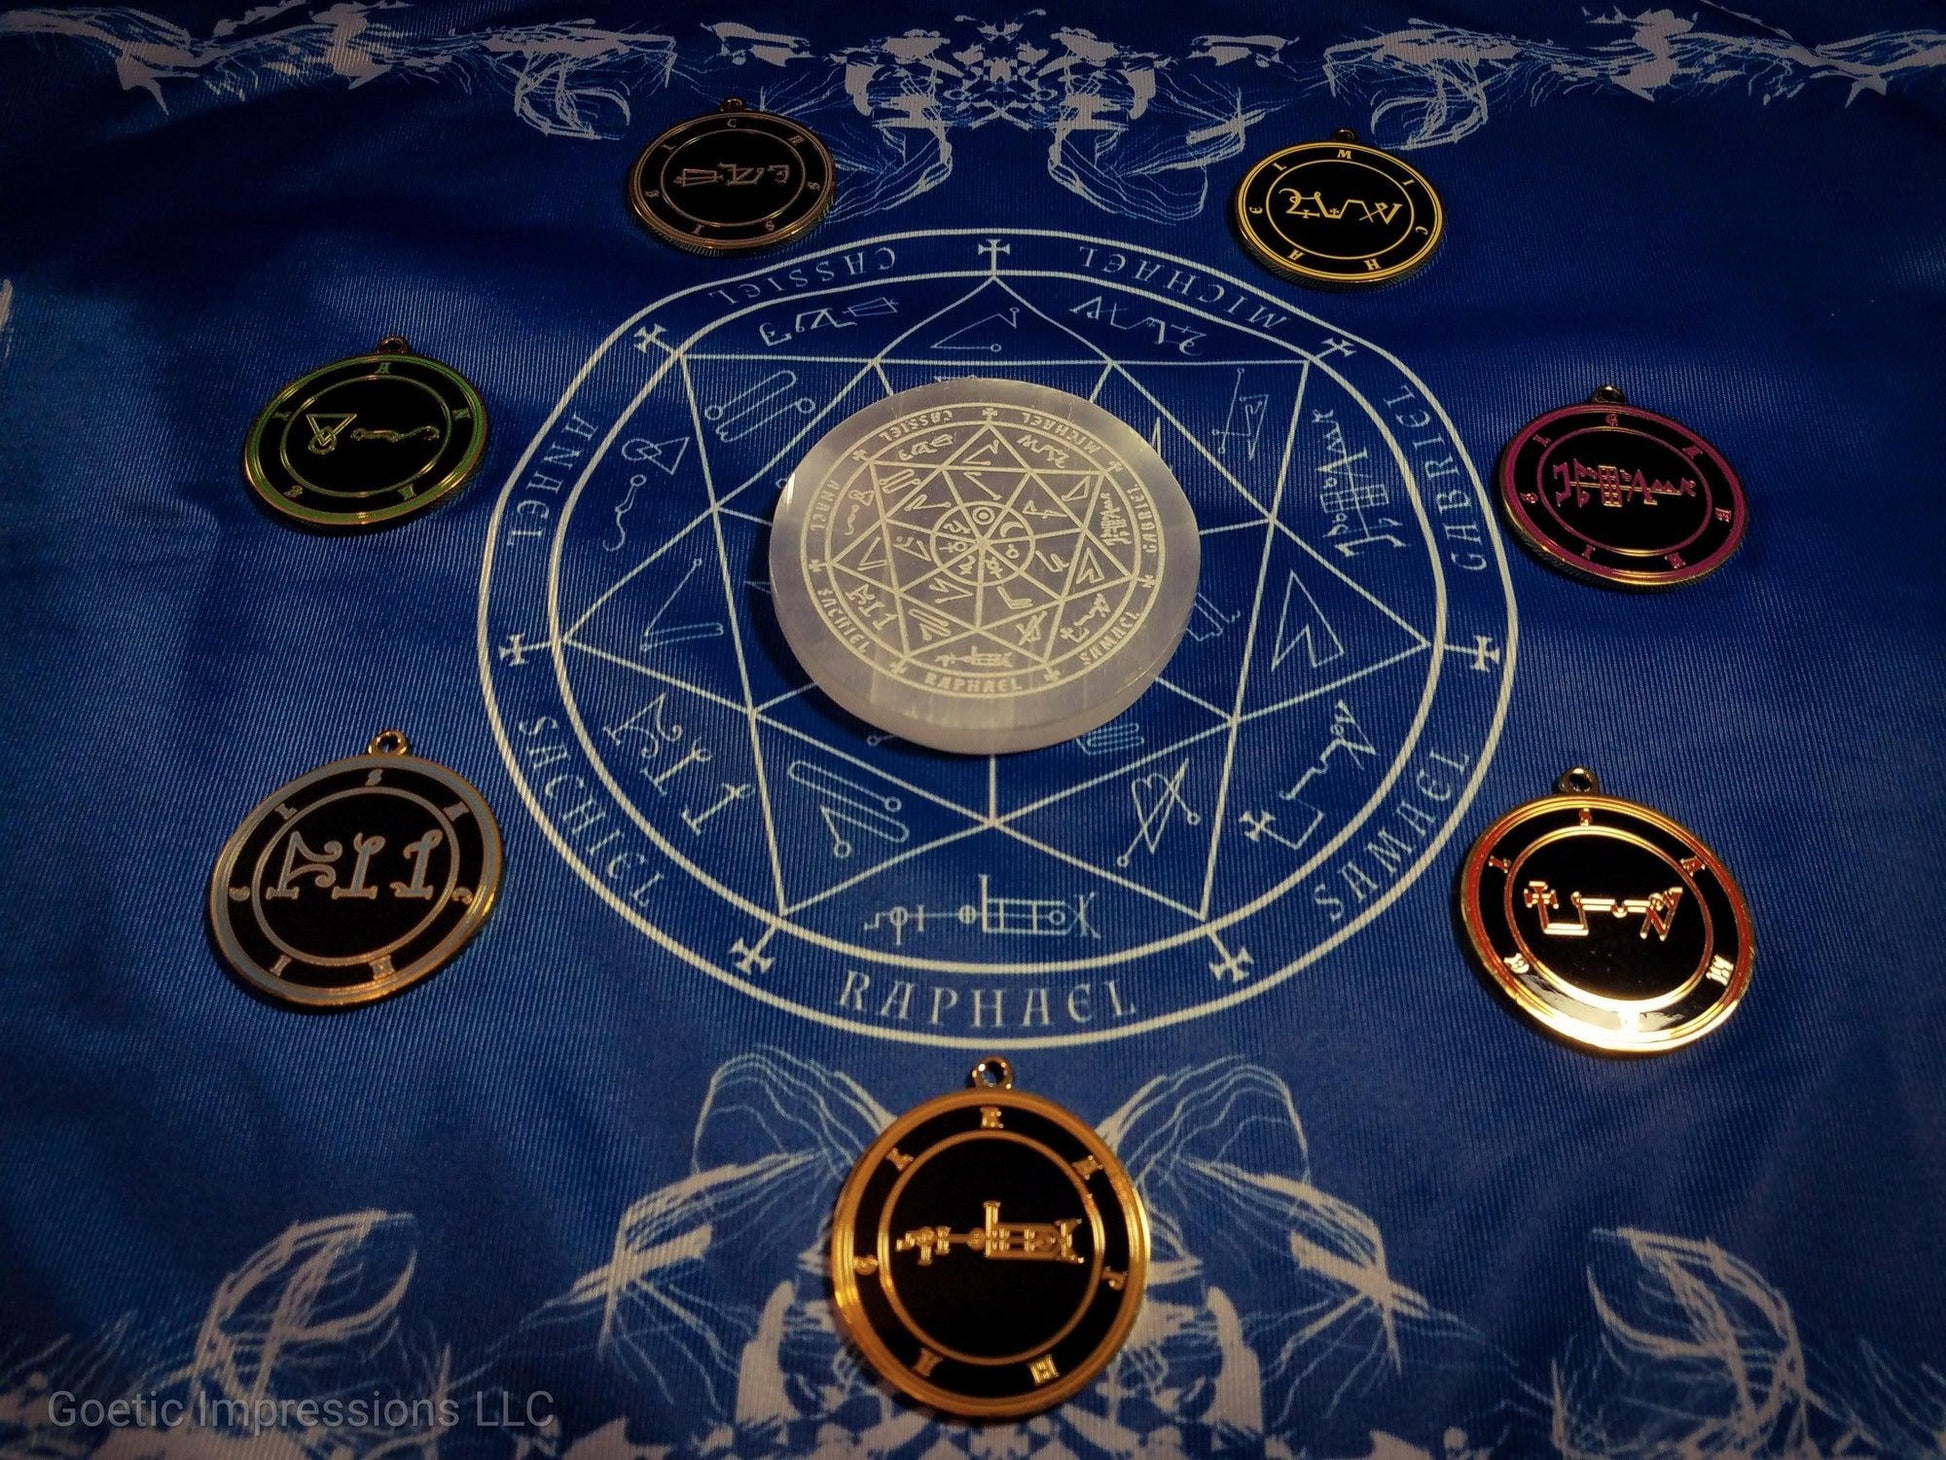 7 Planetary Arch Angel Altar Cloth with Astrological and Heptameron Sigils with archangel medallions